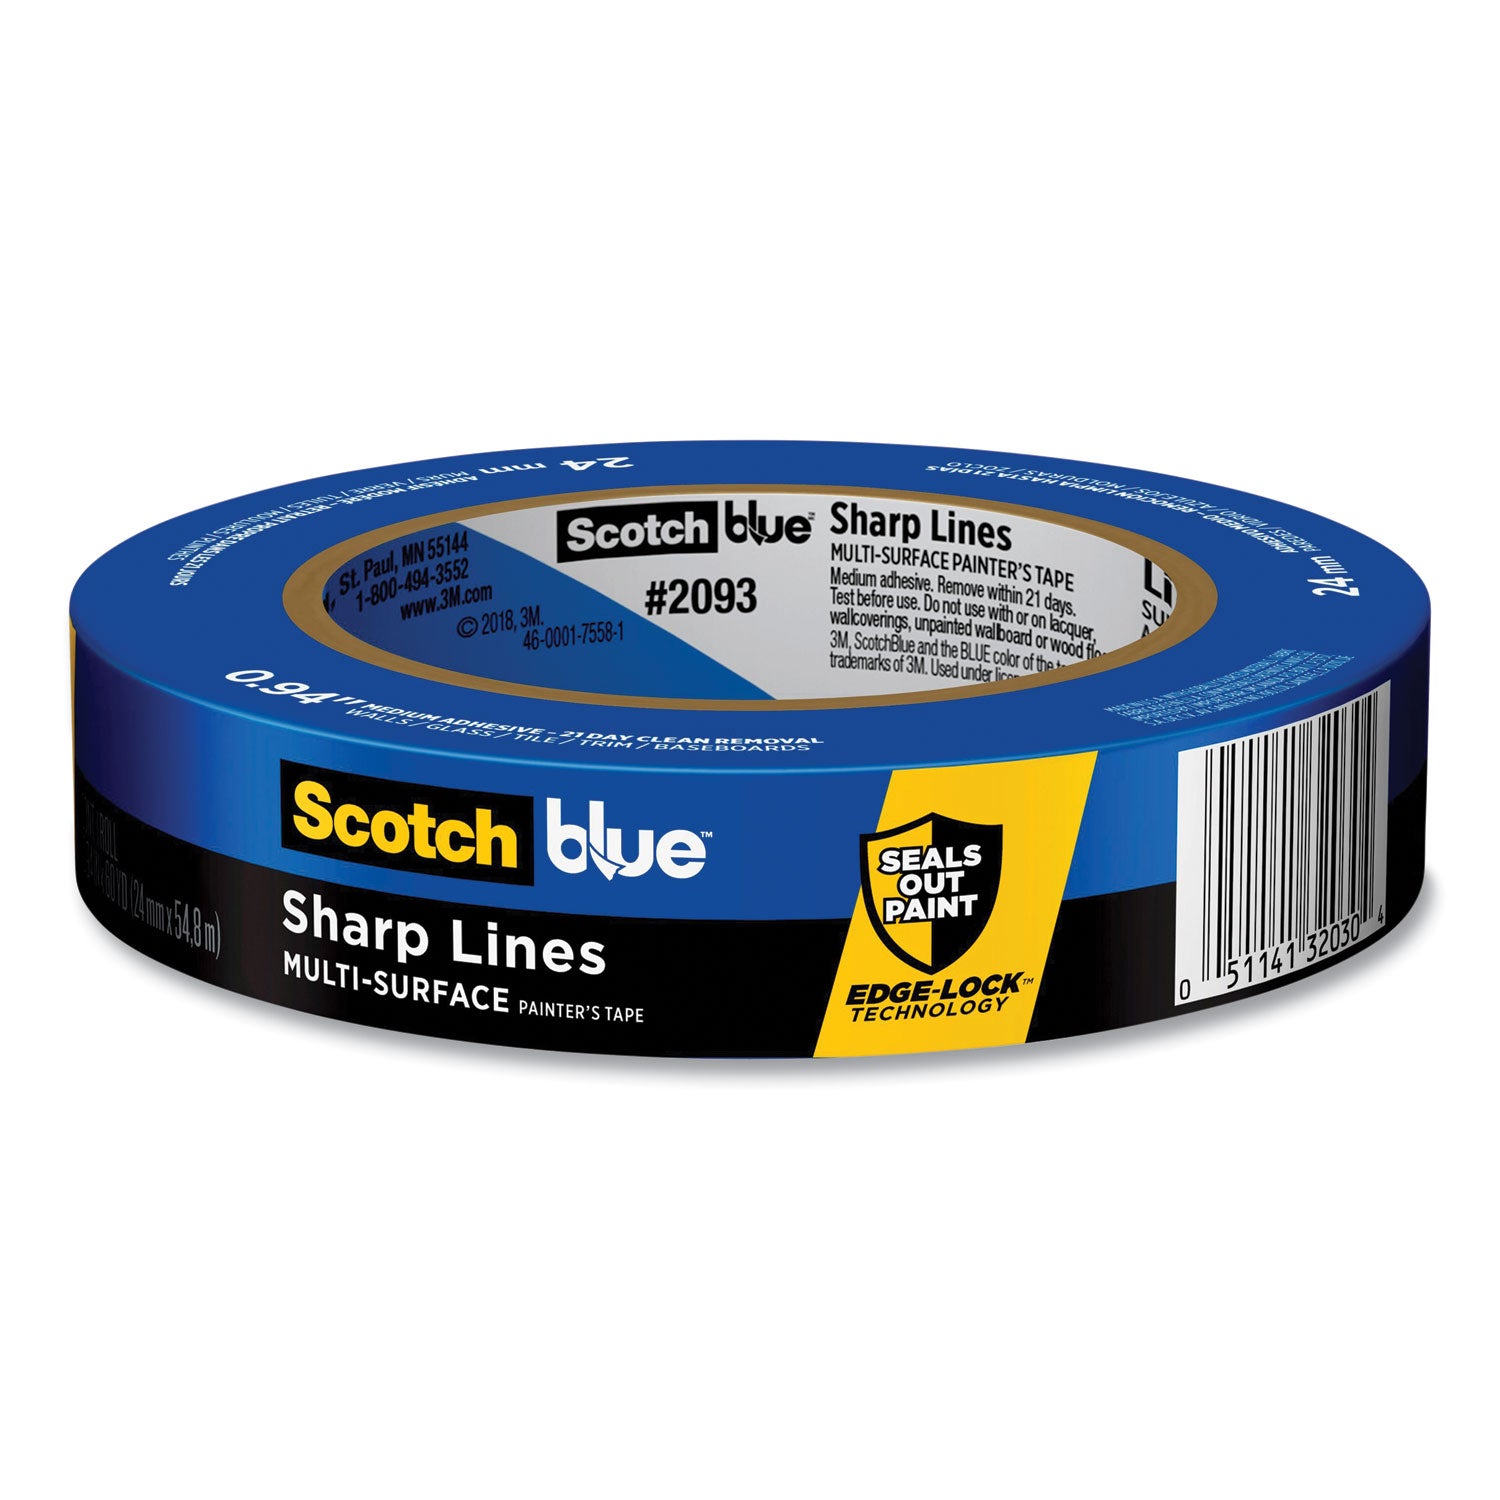 sharp-lines-multi-surface-painters-tape-3-core-094-x-60-yds-blue_mmm70006578119 - 1